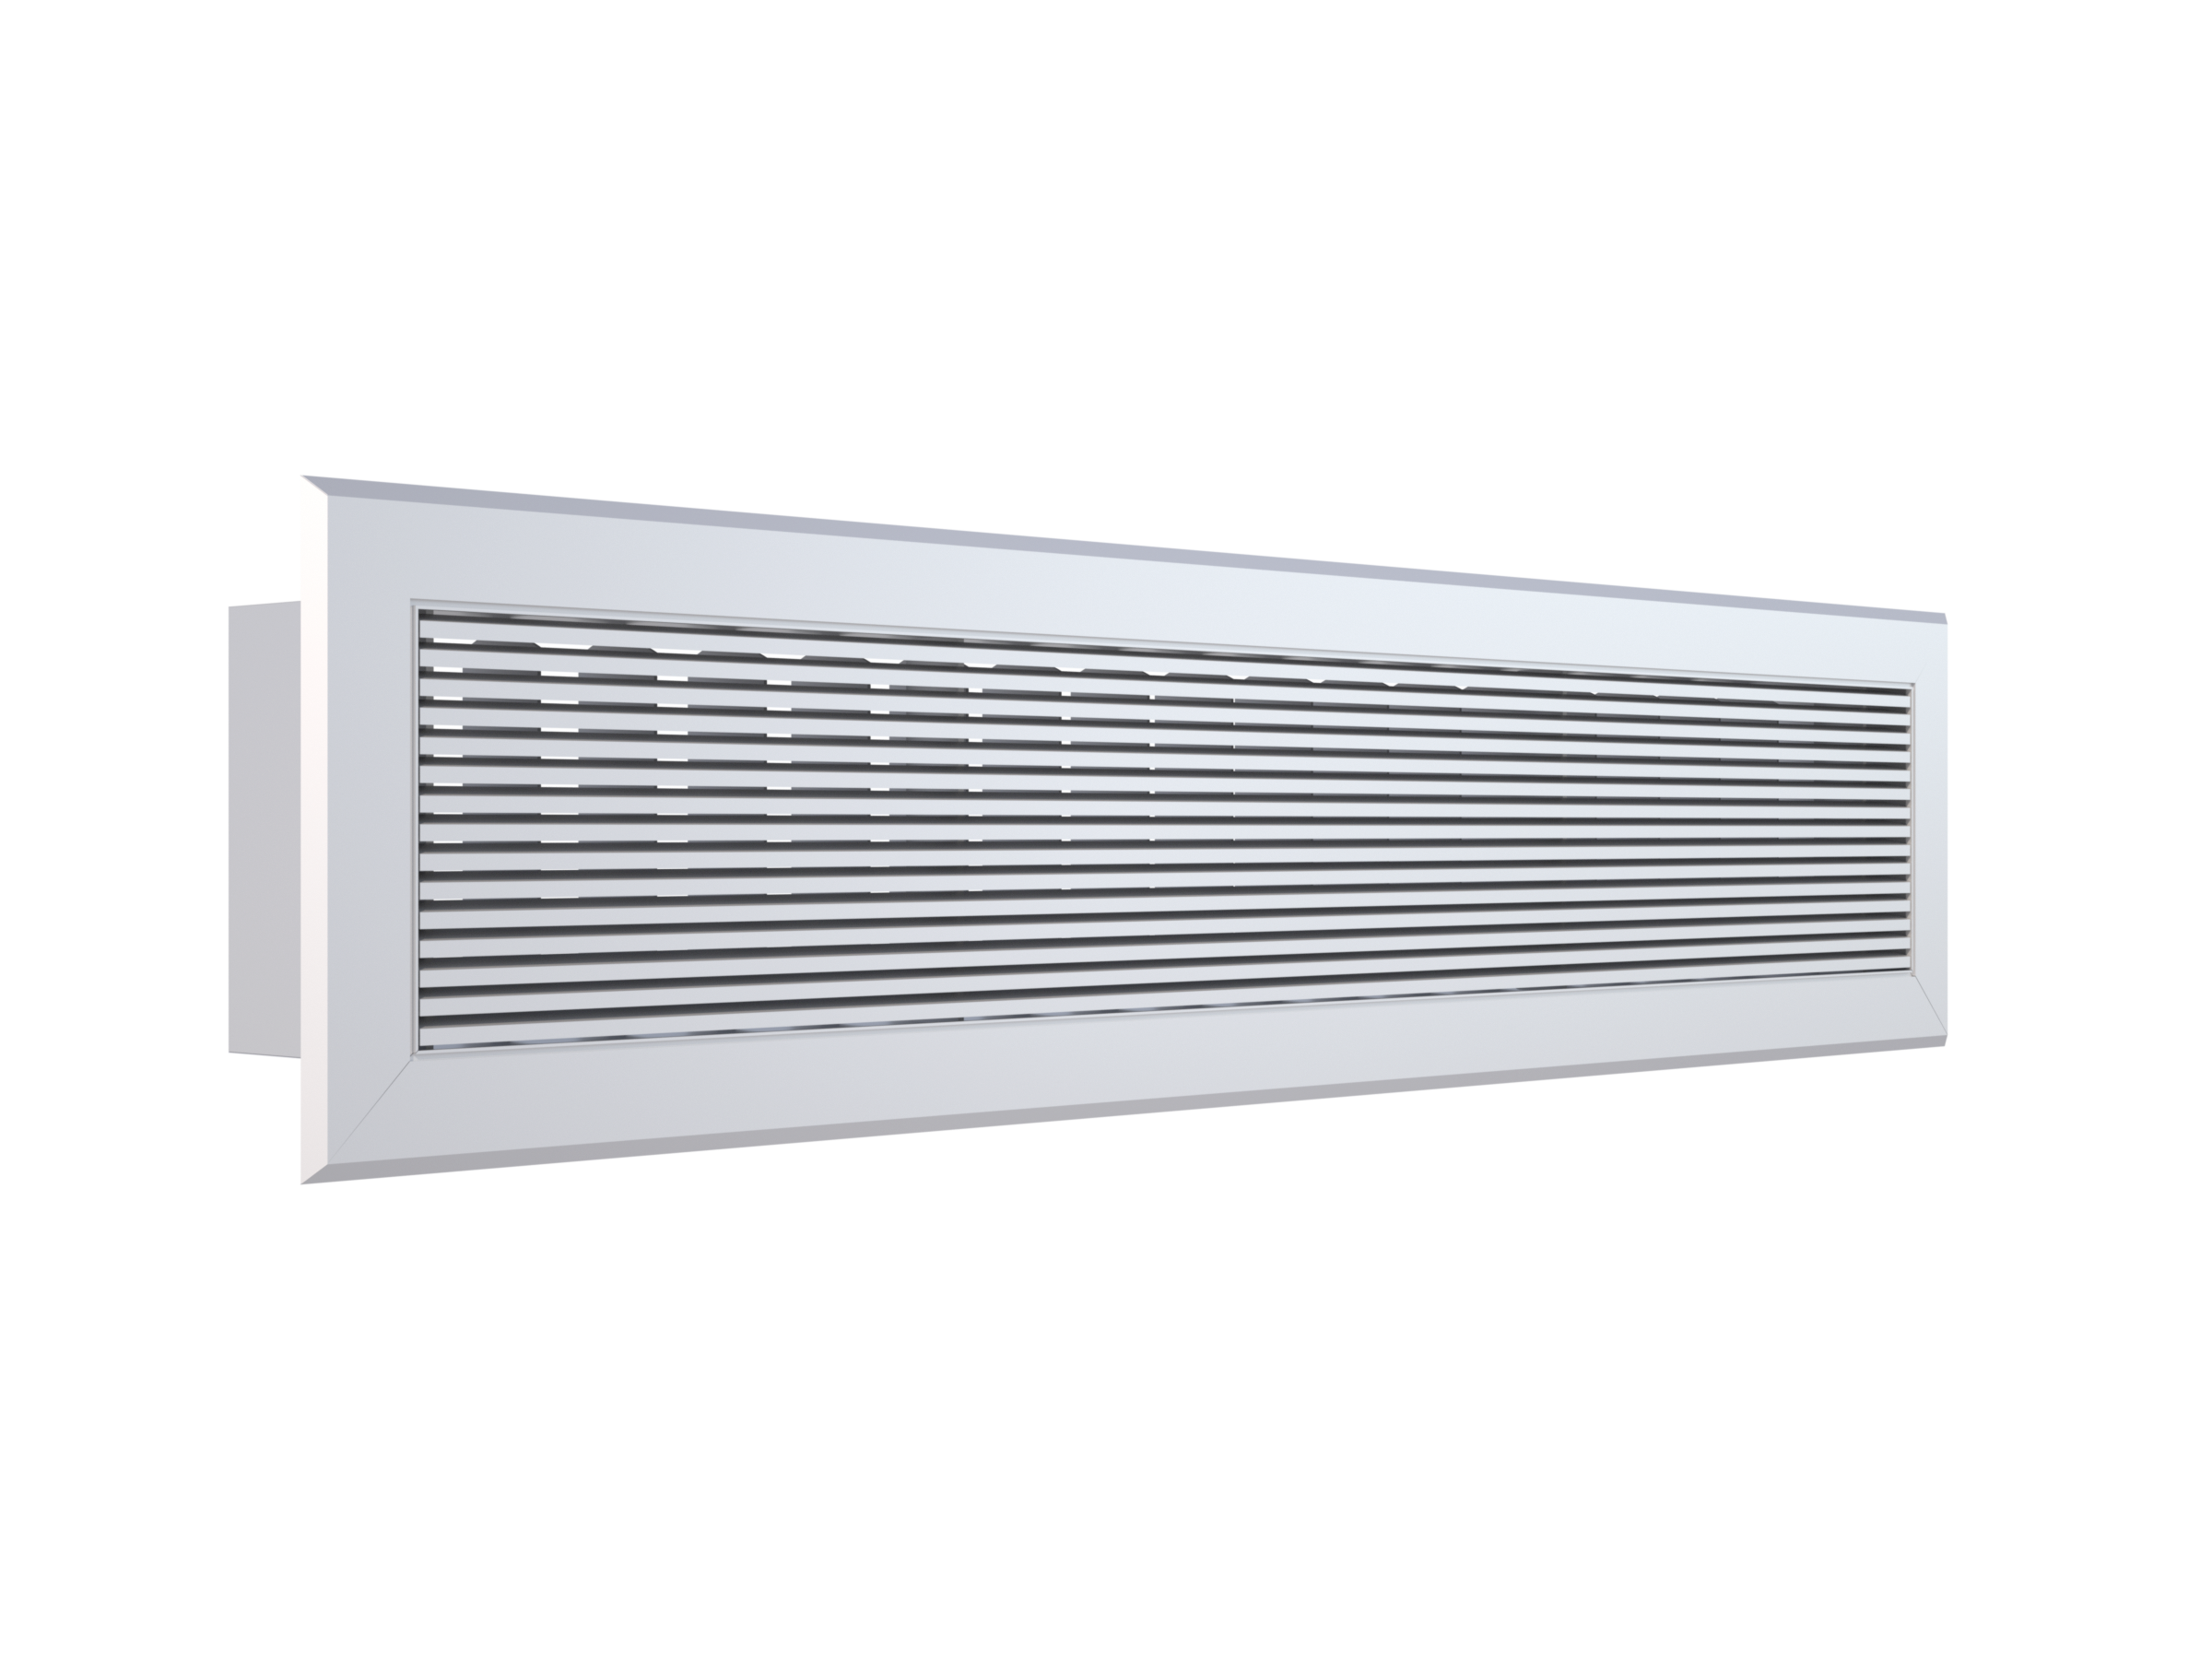 Holyoake LD-615SD Linear Bar Grille with 15-degree air discharge and 6mm blade spacing with rear adjustable blades